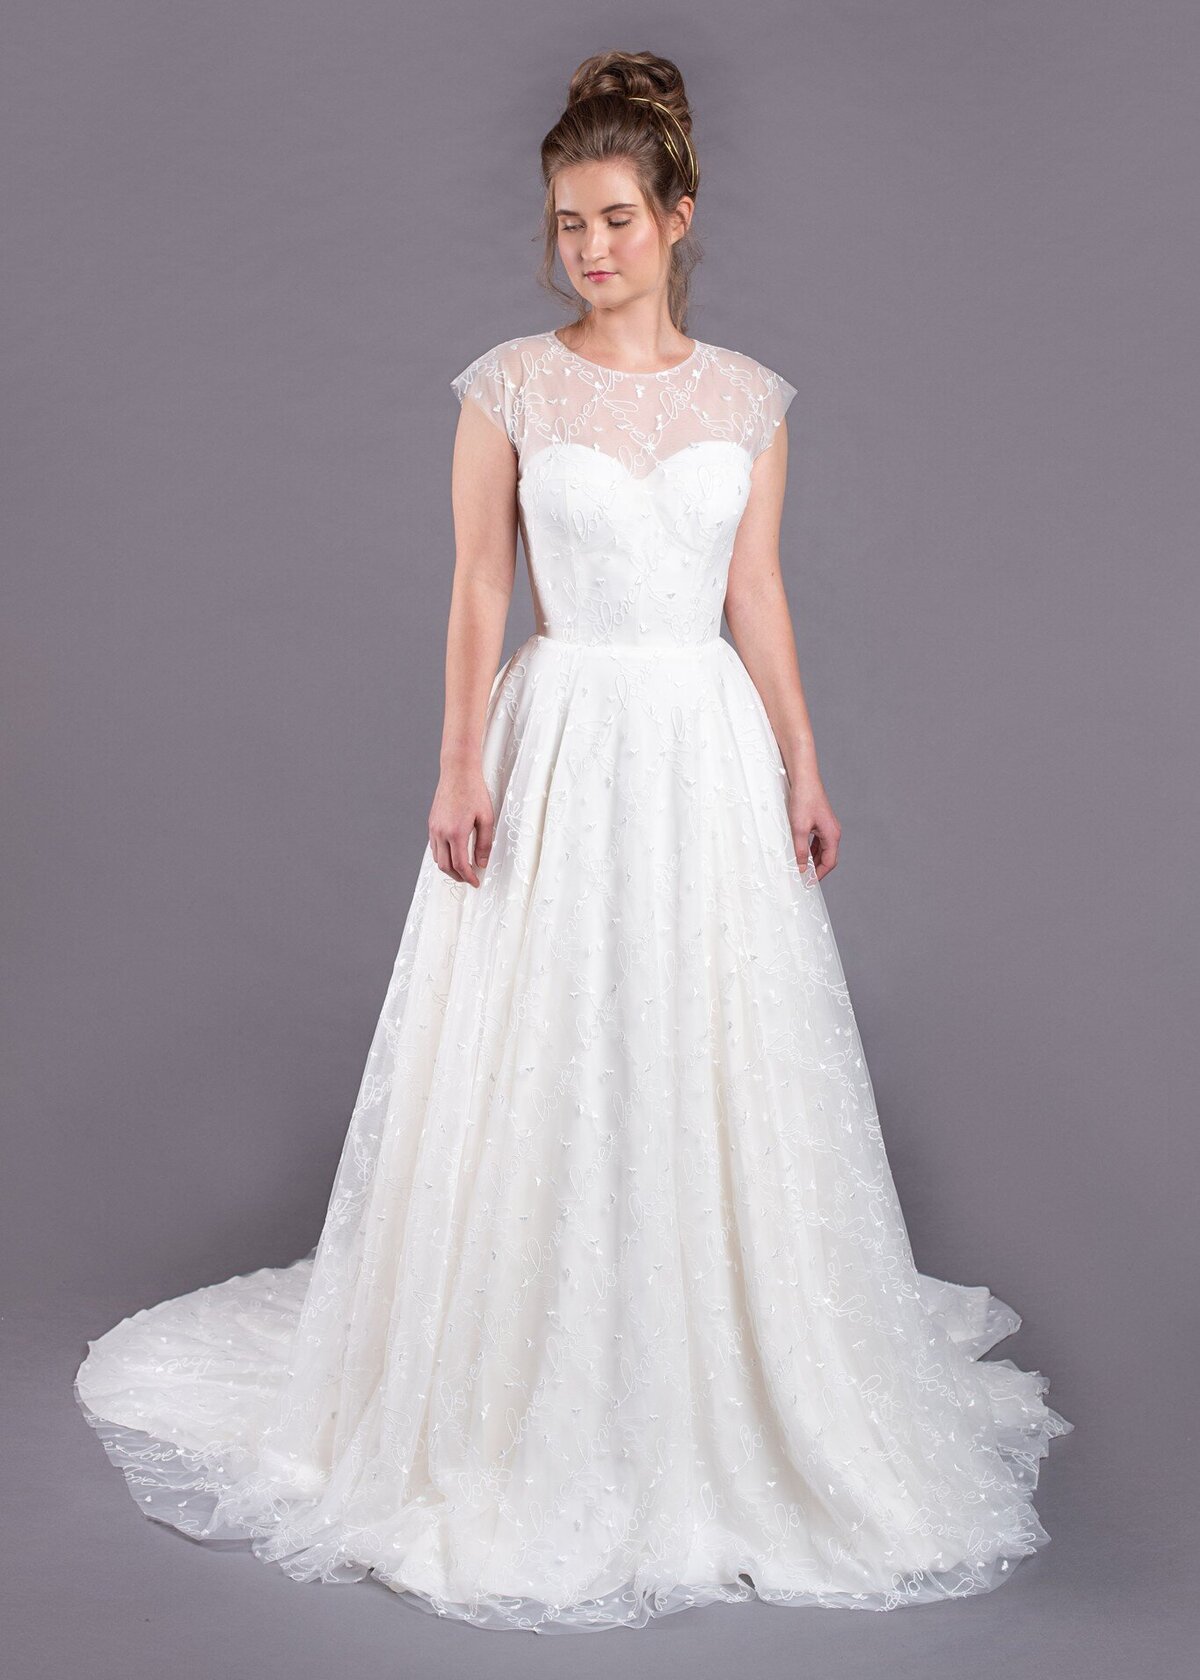 The Norma Jean style from the Edith Elan bridal collection is an illusion neckline wedding dress with love written all over it.